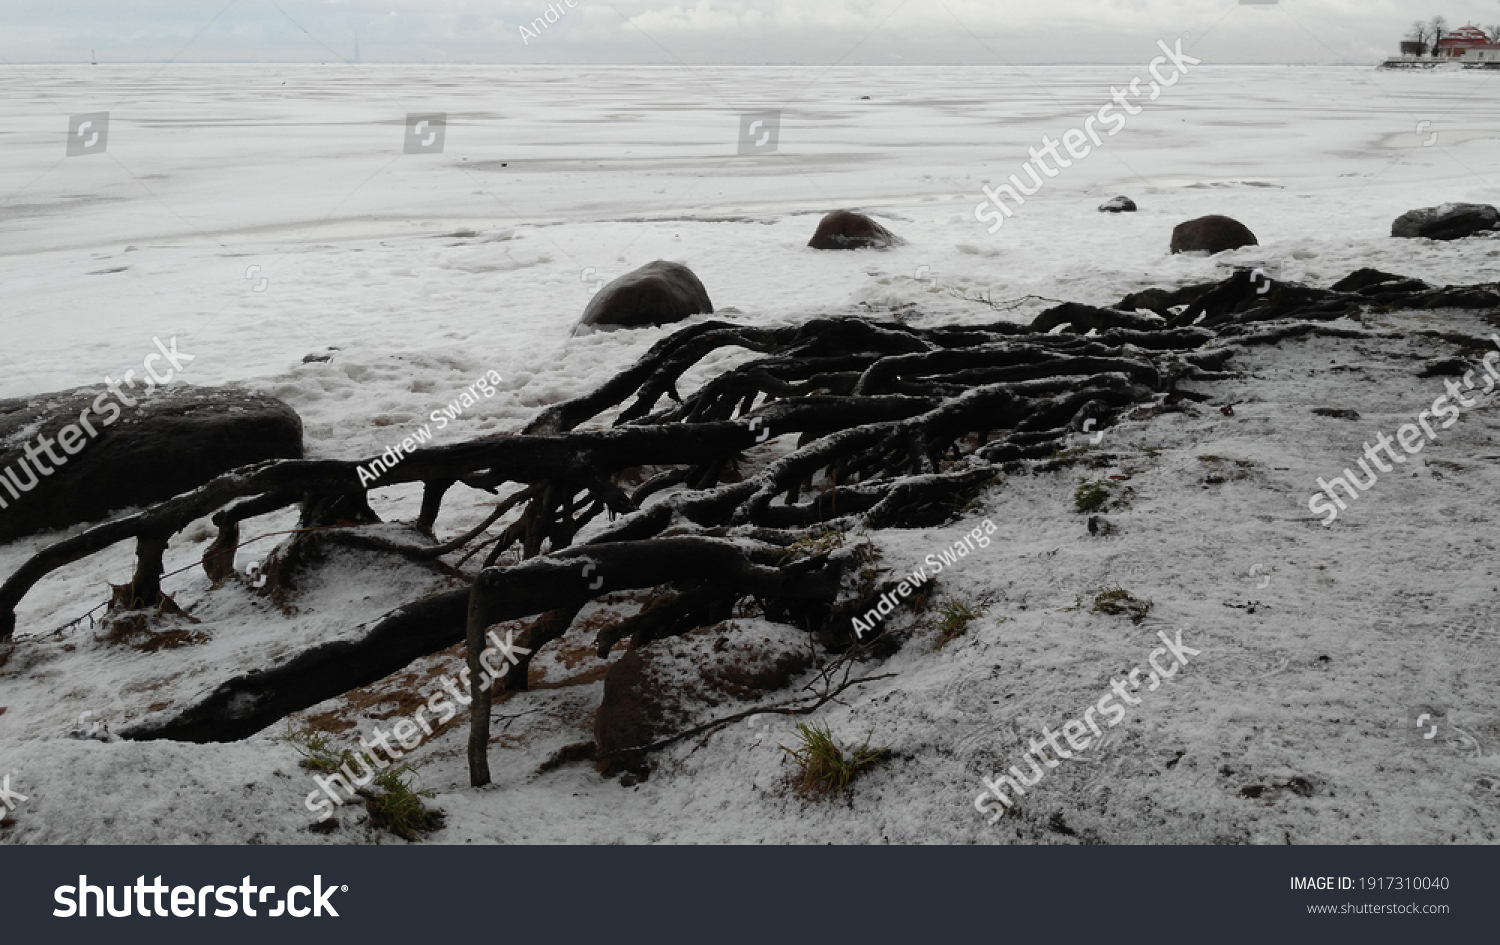 Wooden skeleton of exposed roots. Winter, coast of the Gulf of Fink. The roots of an old tree stick out from under the snow. the roots are open like a sklket. Nearby are several large cobblestones. #1917310040